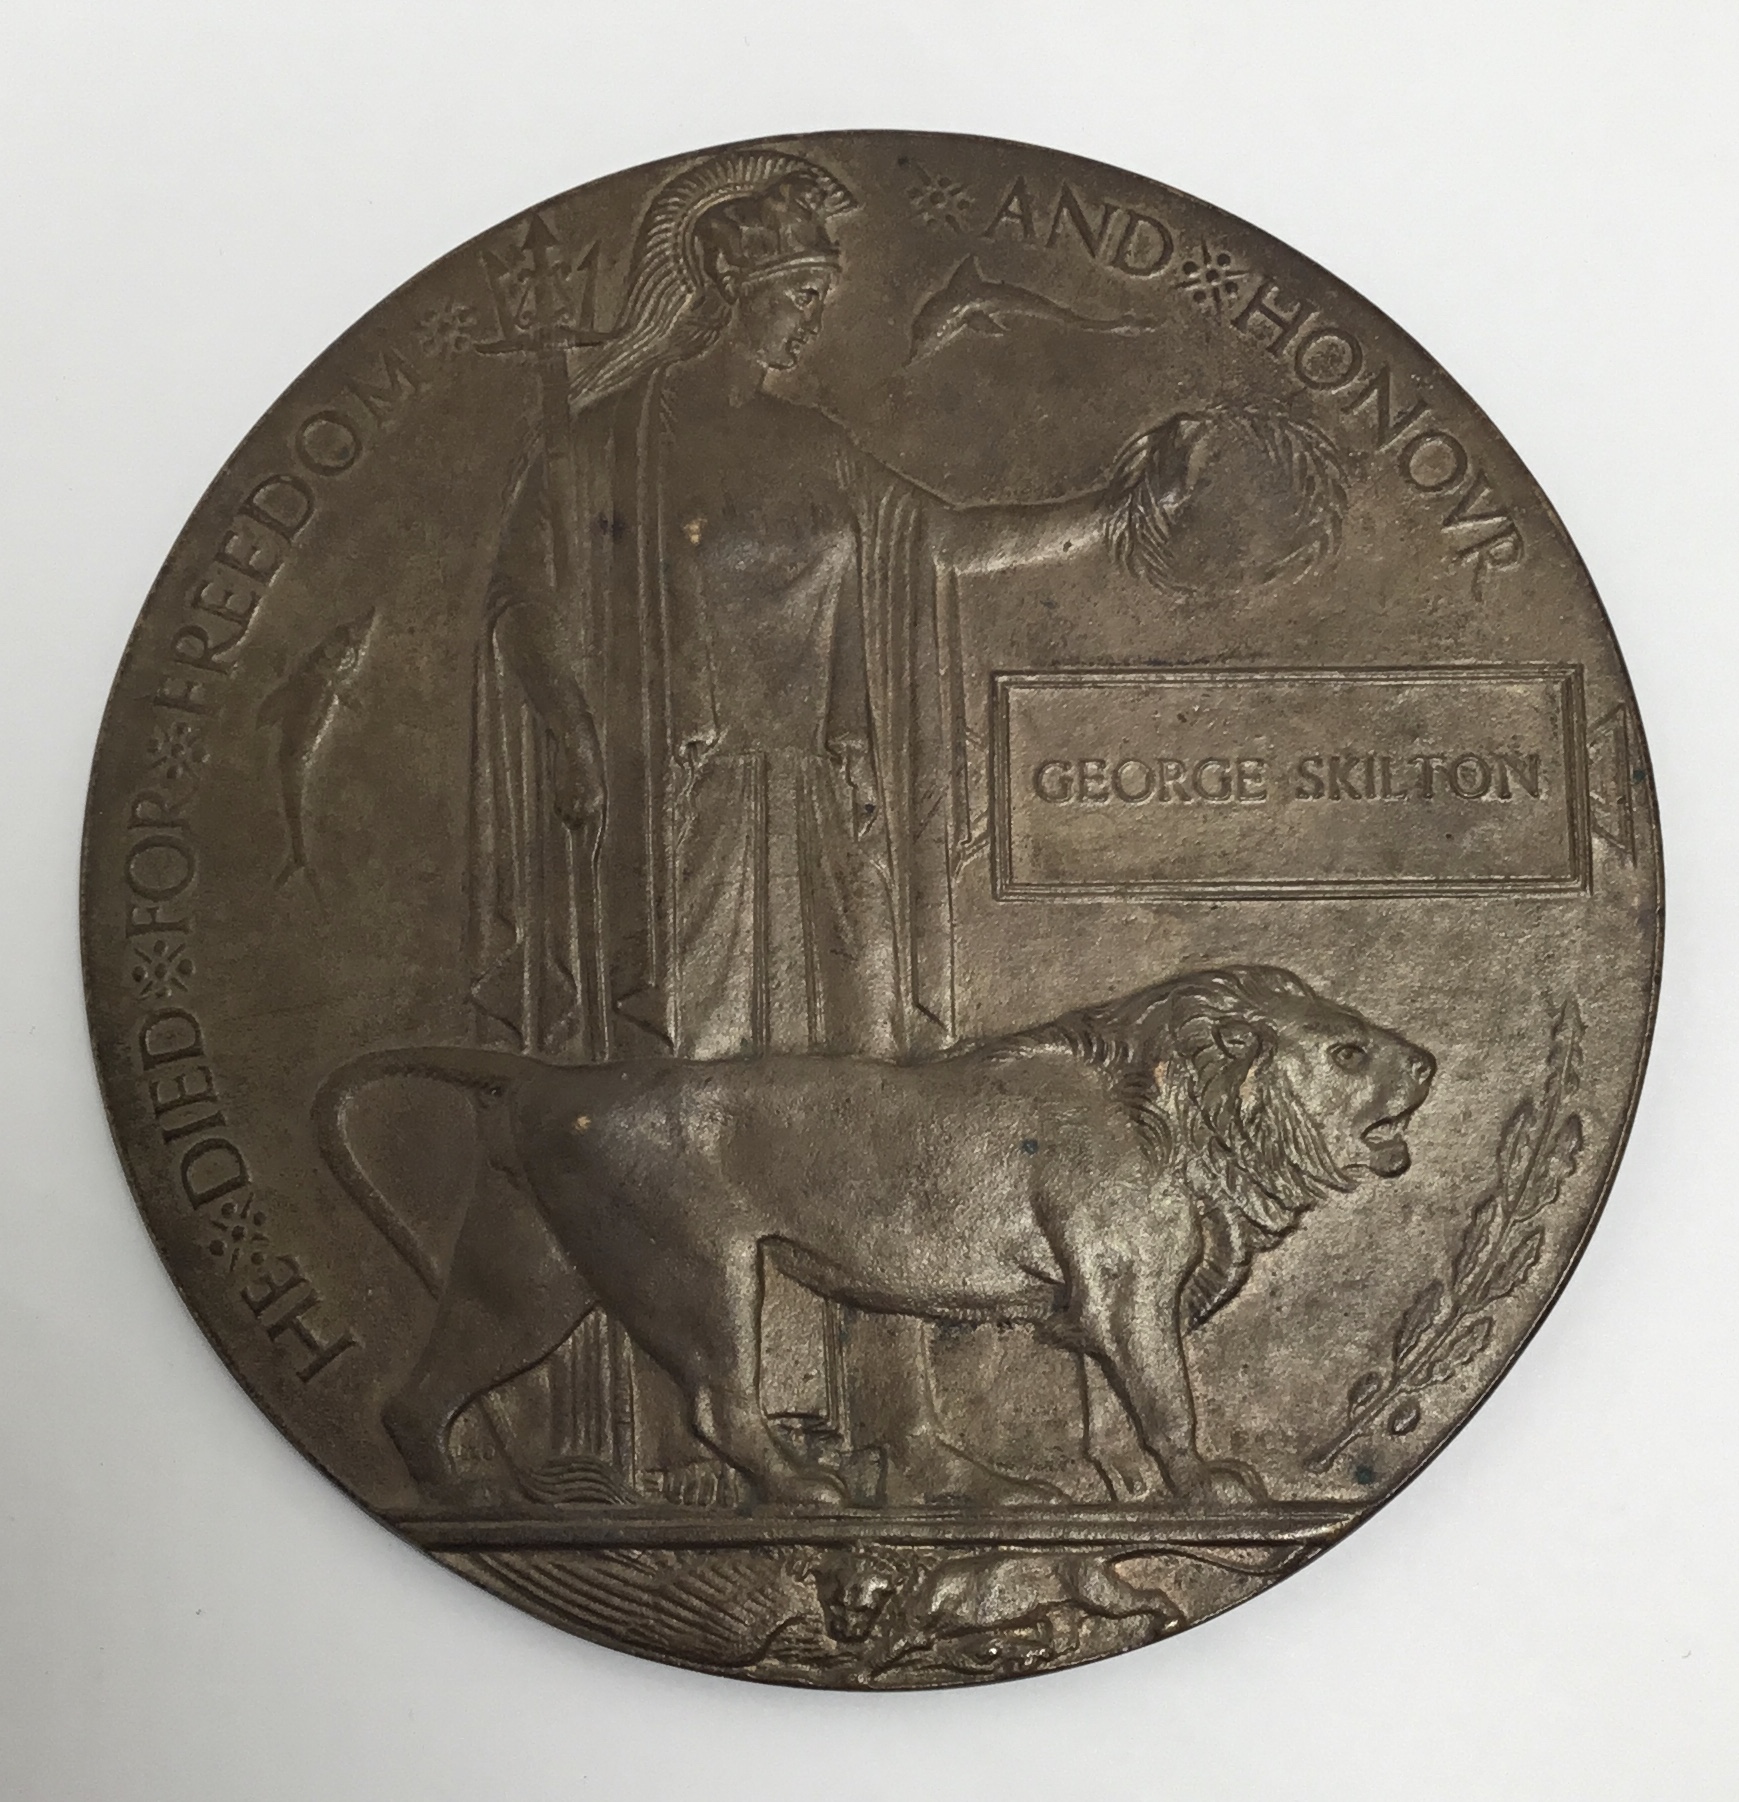 A First Day of the Somme 01/07/1916 casualty death plaque, named to 12499 Pte George Skilton of